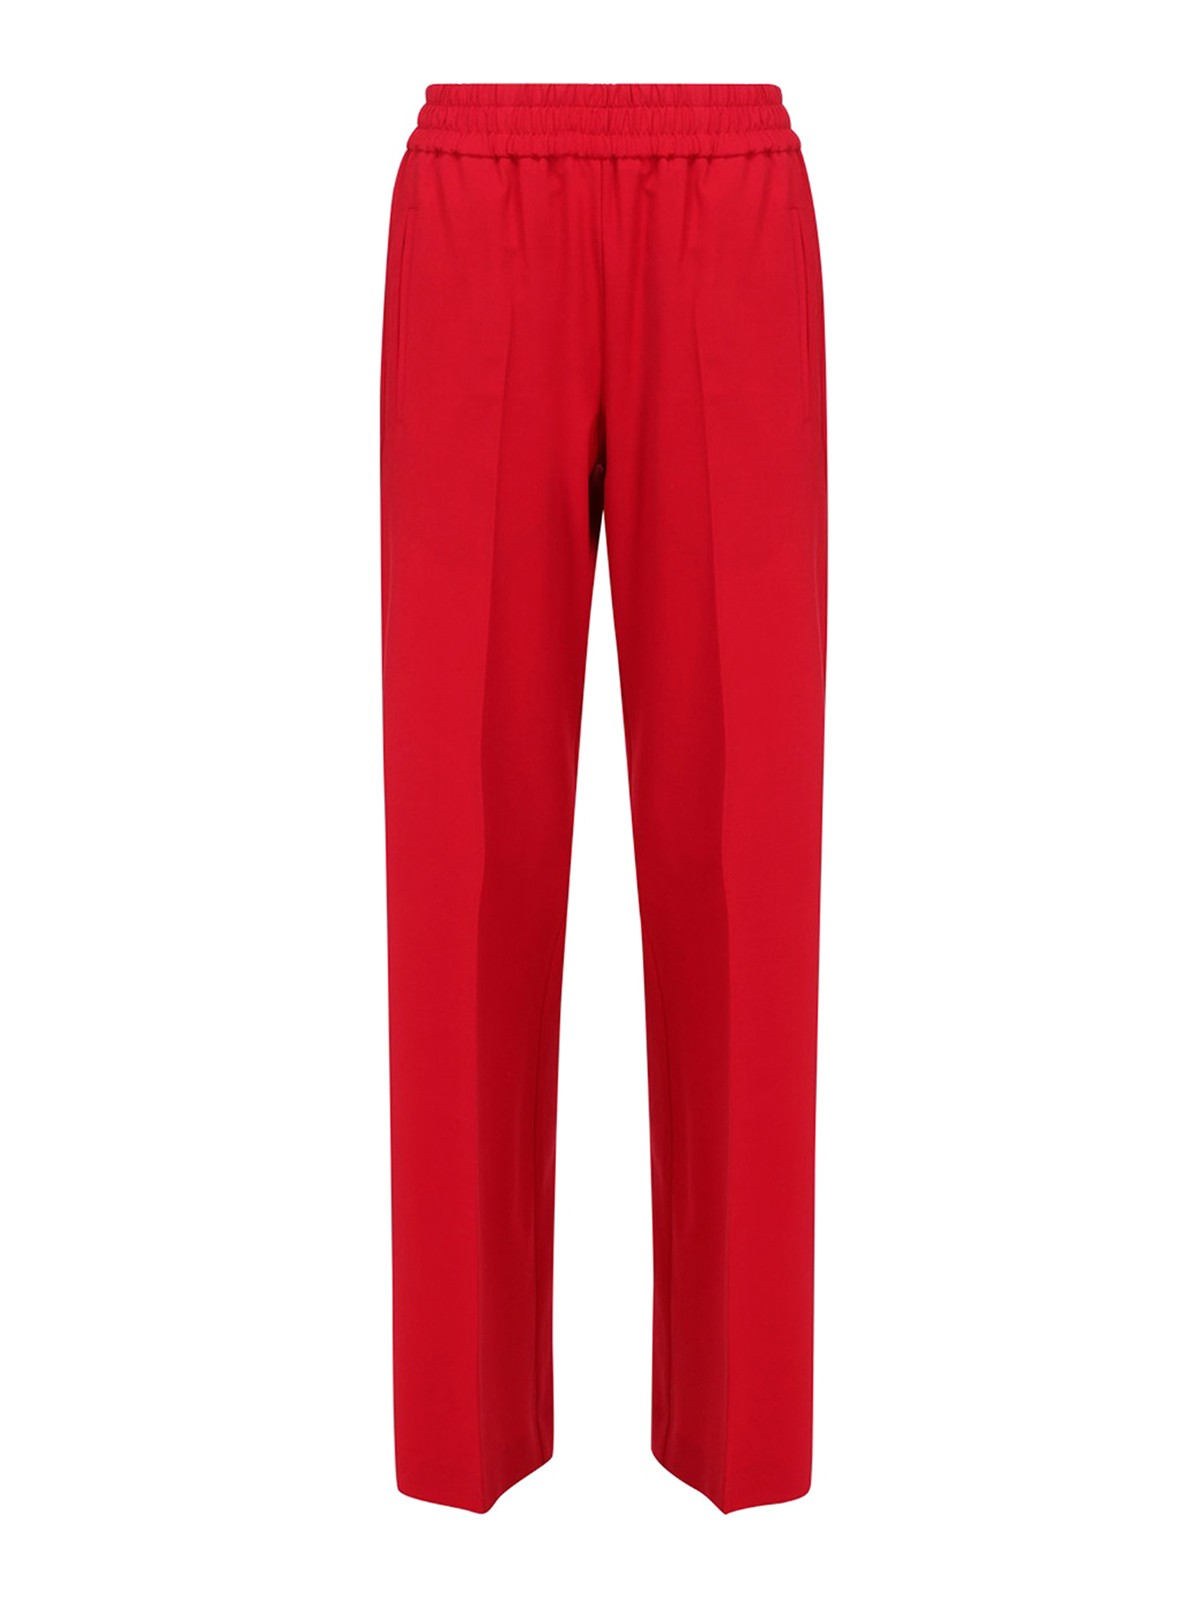 Red Tracksuit Bottoms